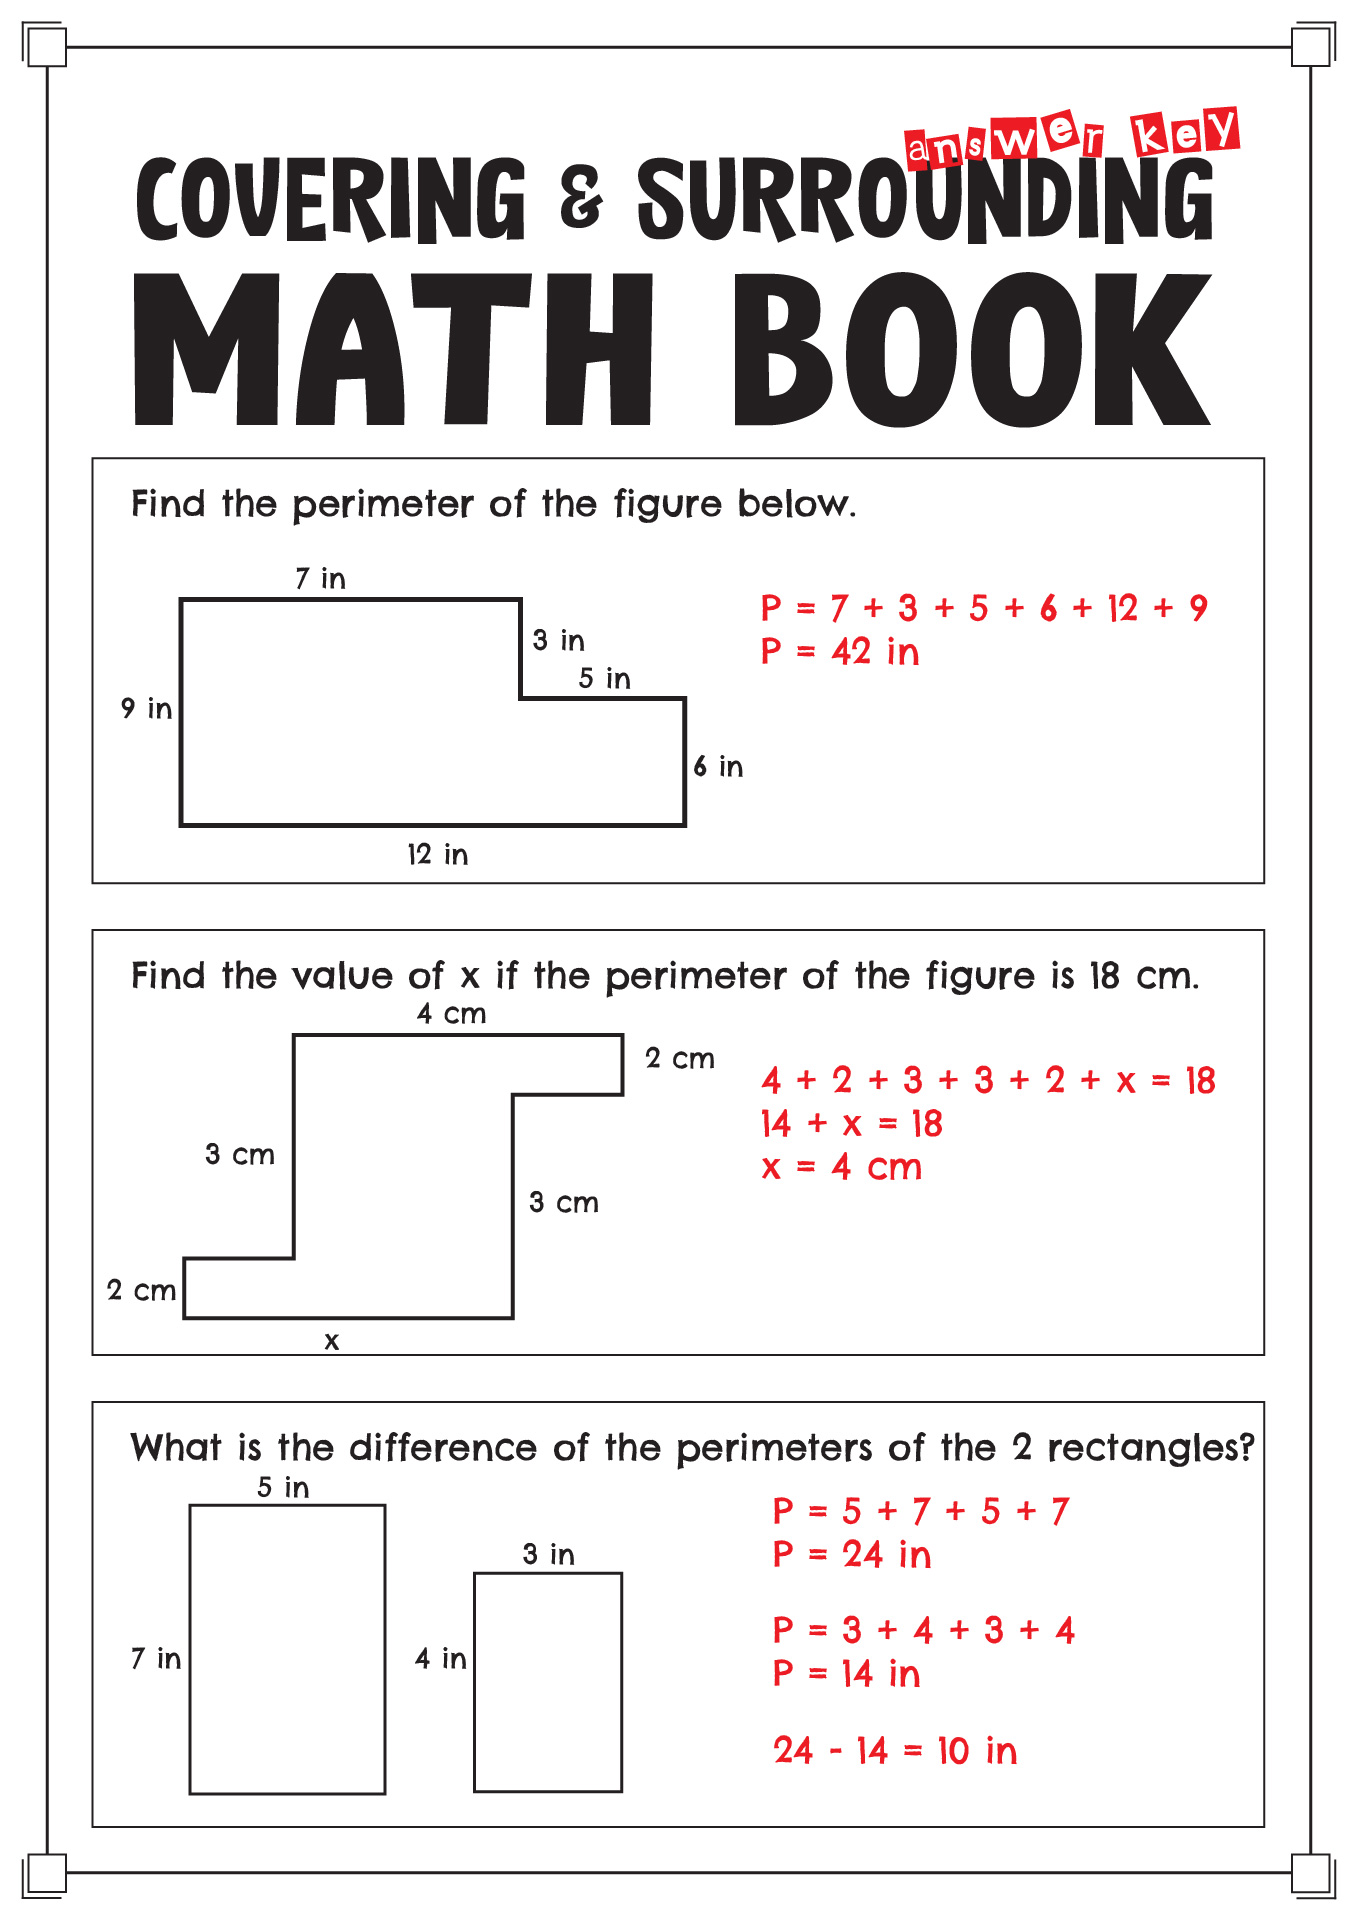 Covering and Surrounding Math Book Answer Key